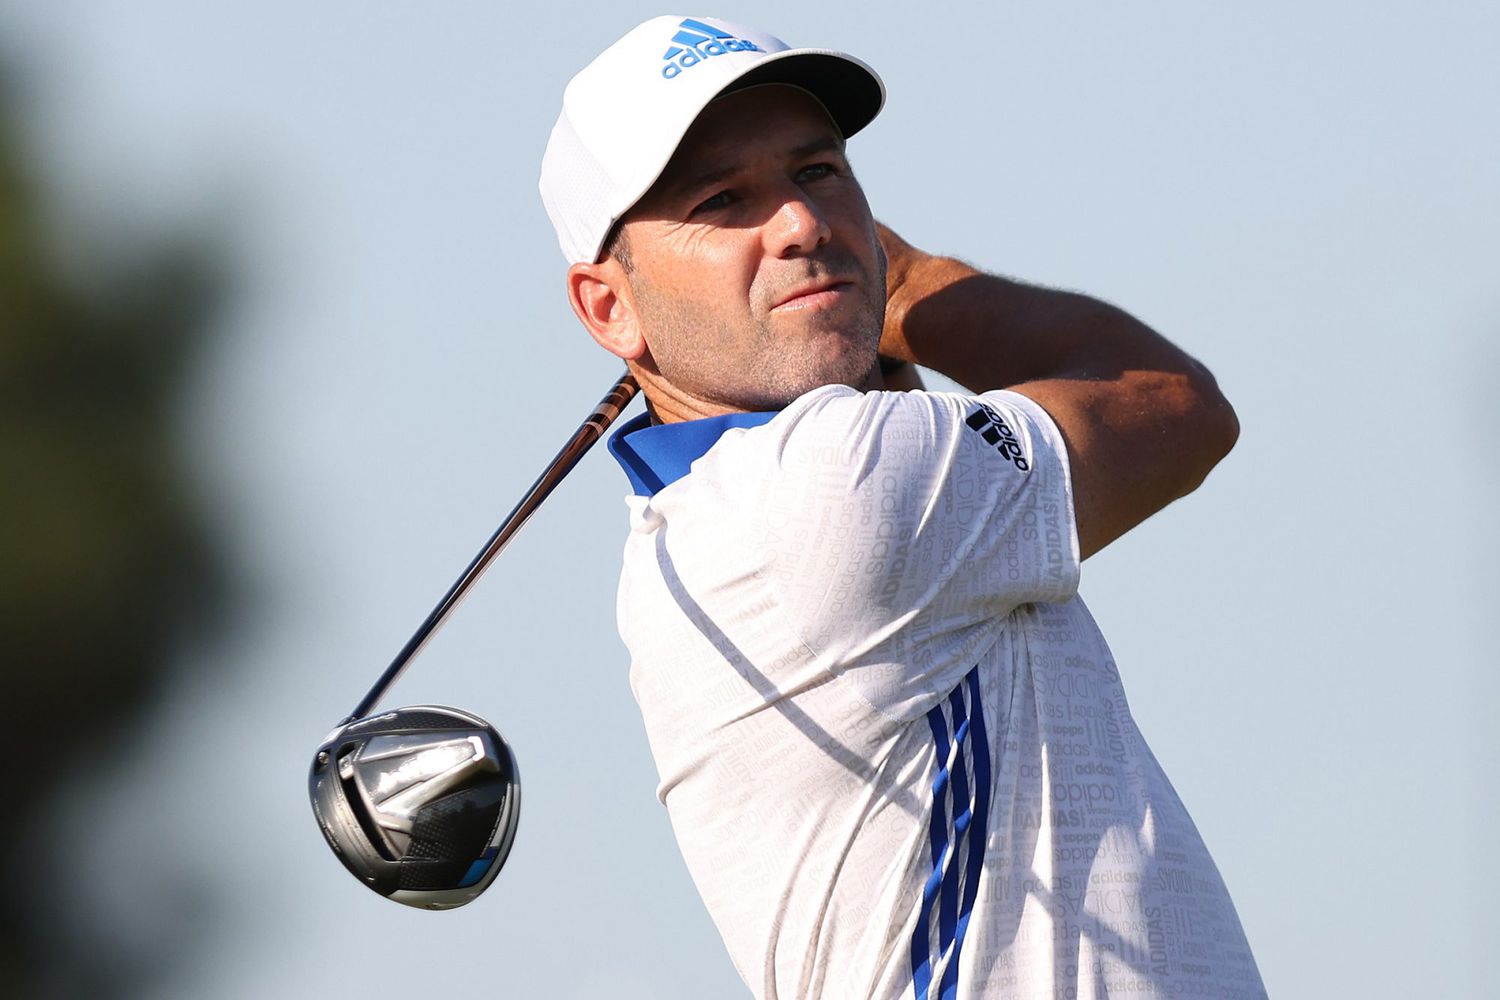 The 42-year old son of father (?) and mother(?) Sergio Garcia in 2022 photo. Sergio Garcia earned a  million dollar salary - leaving the net worth at  million in 2022